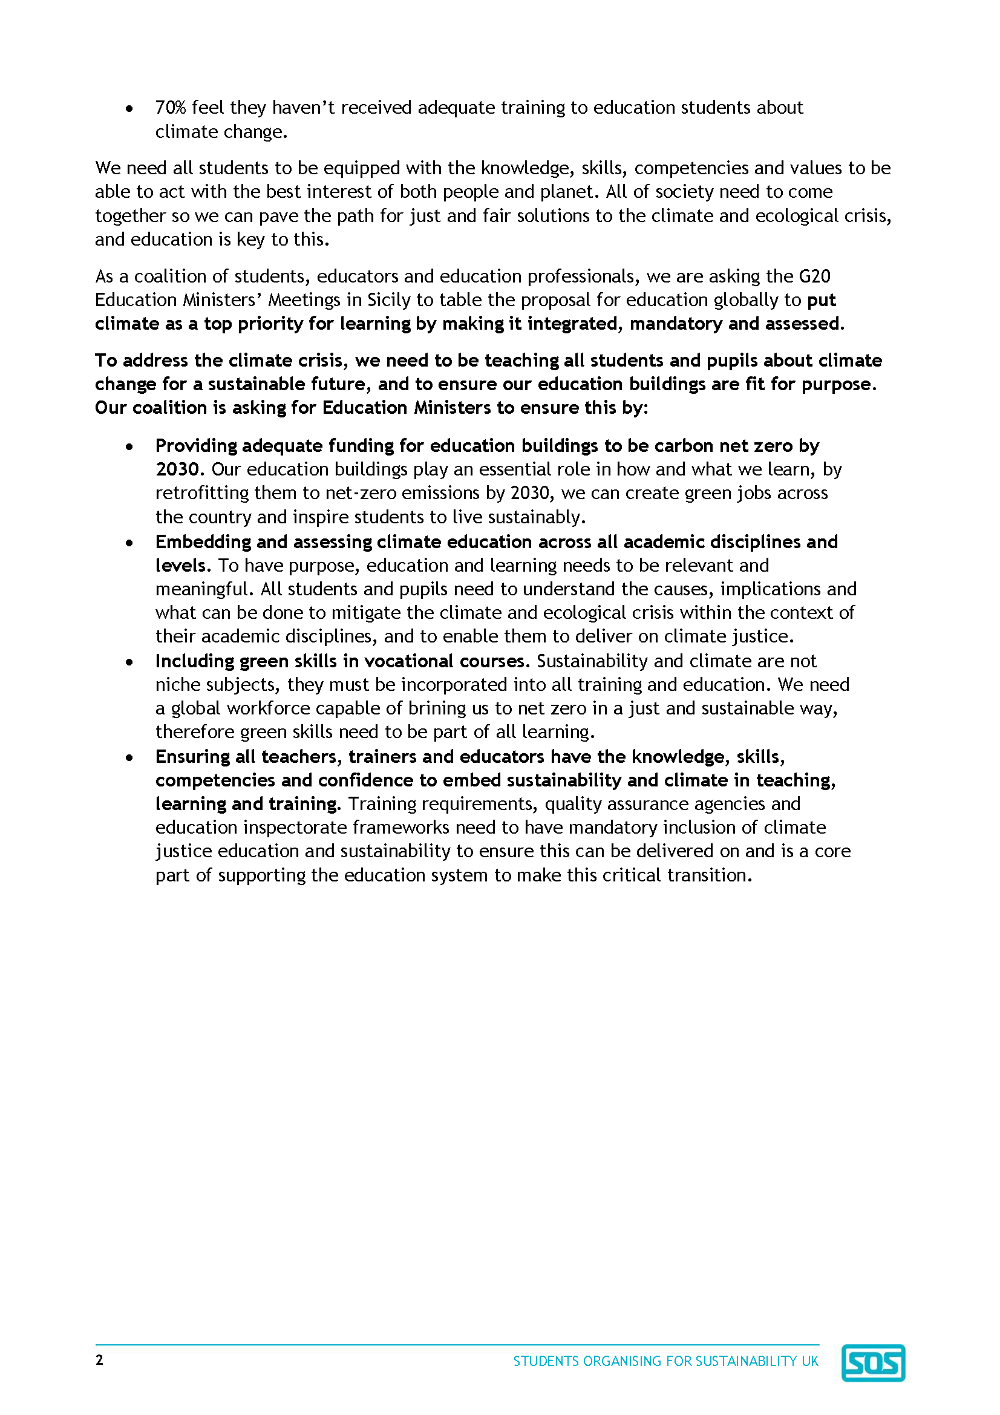 G20 education minister meeting joint statement page 2, Jun 21